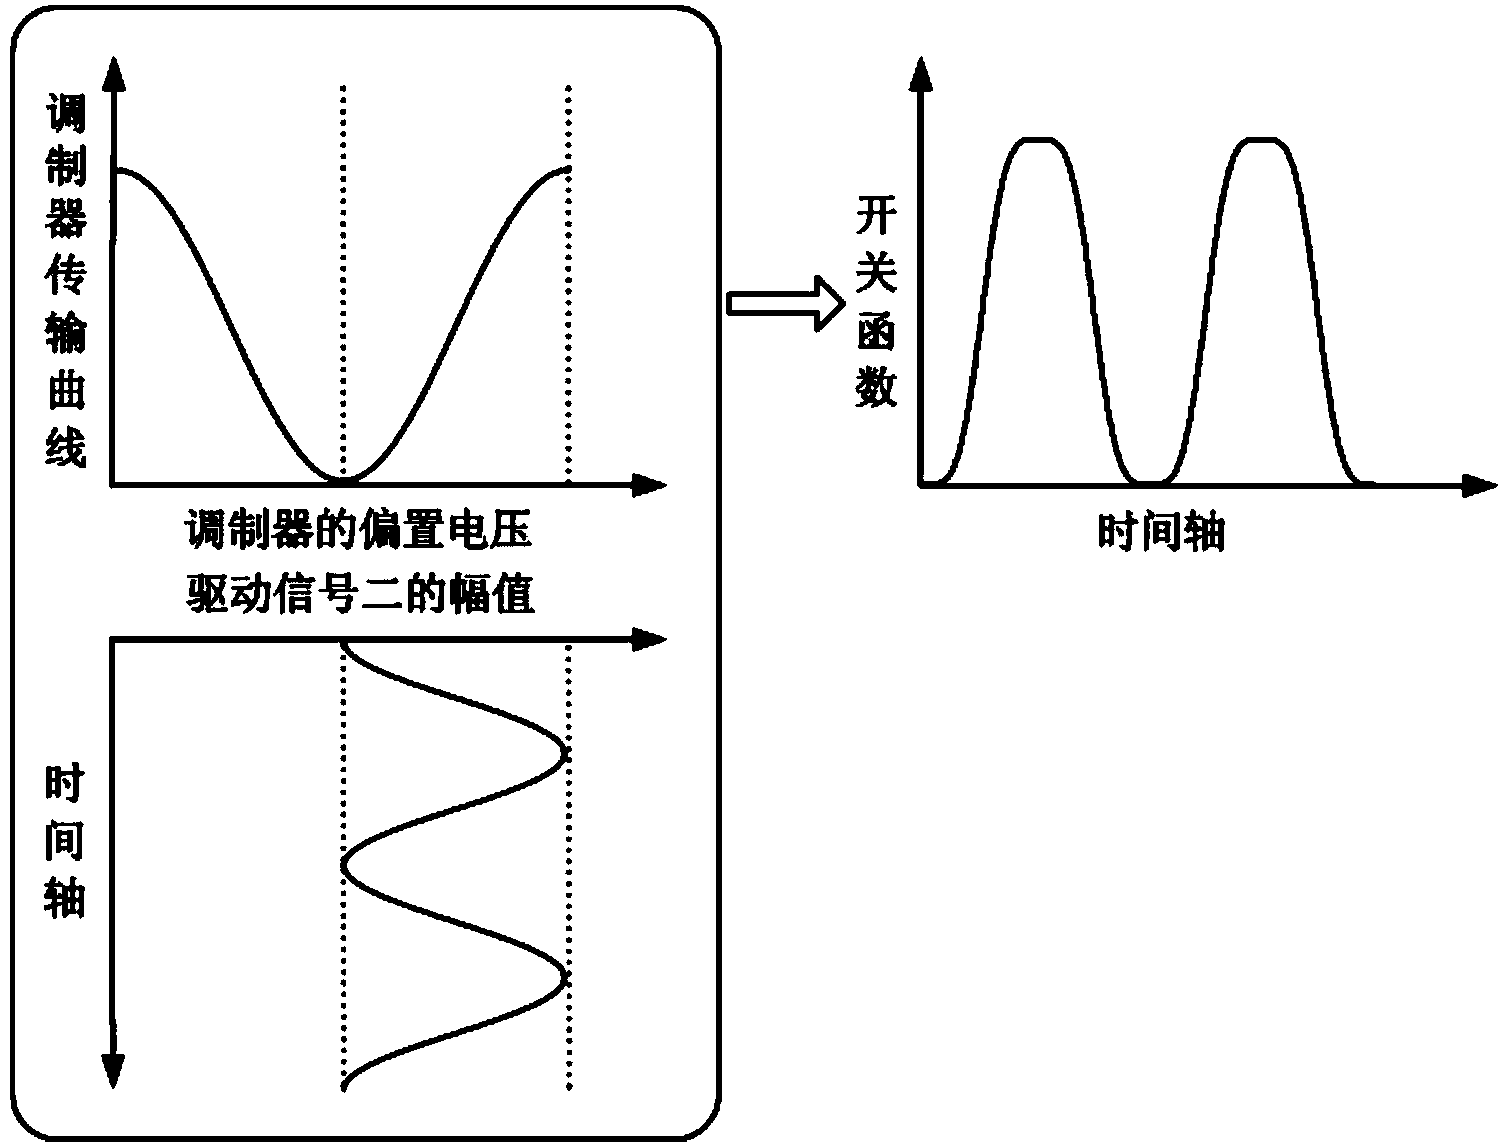 Chirp microwave pulse signal generation method and device based on electro-optic external modulation nonlinear effect